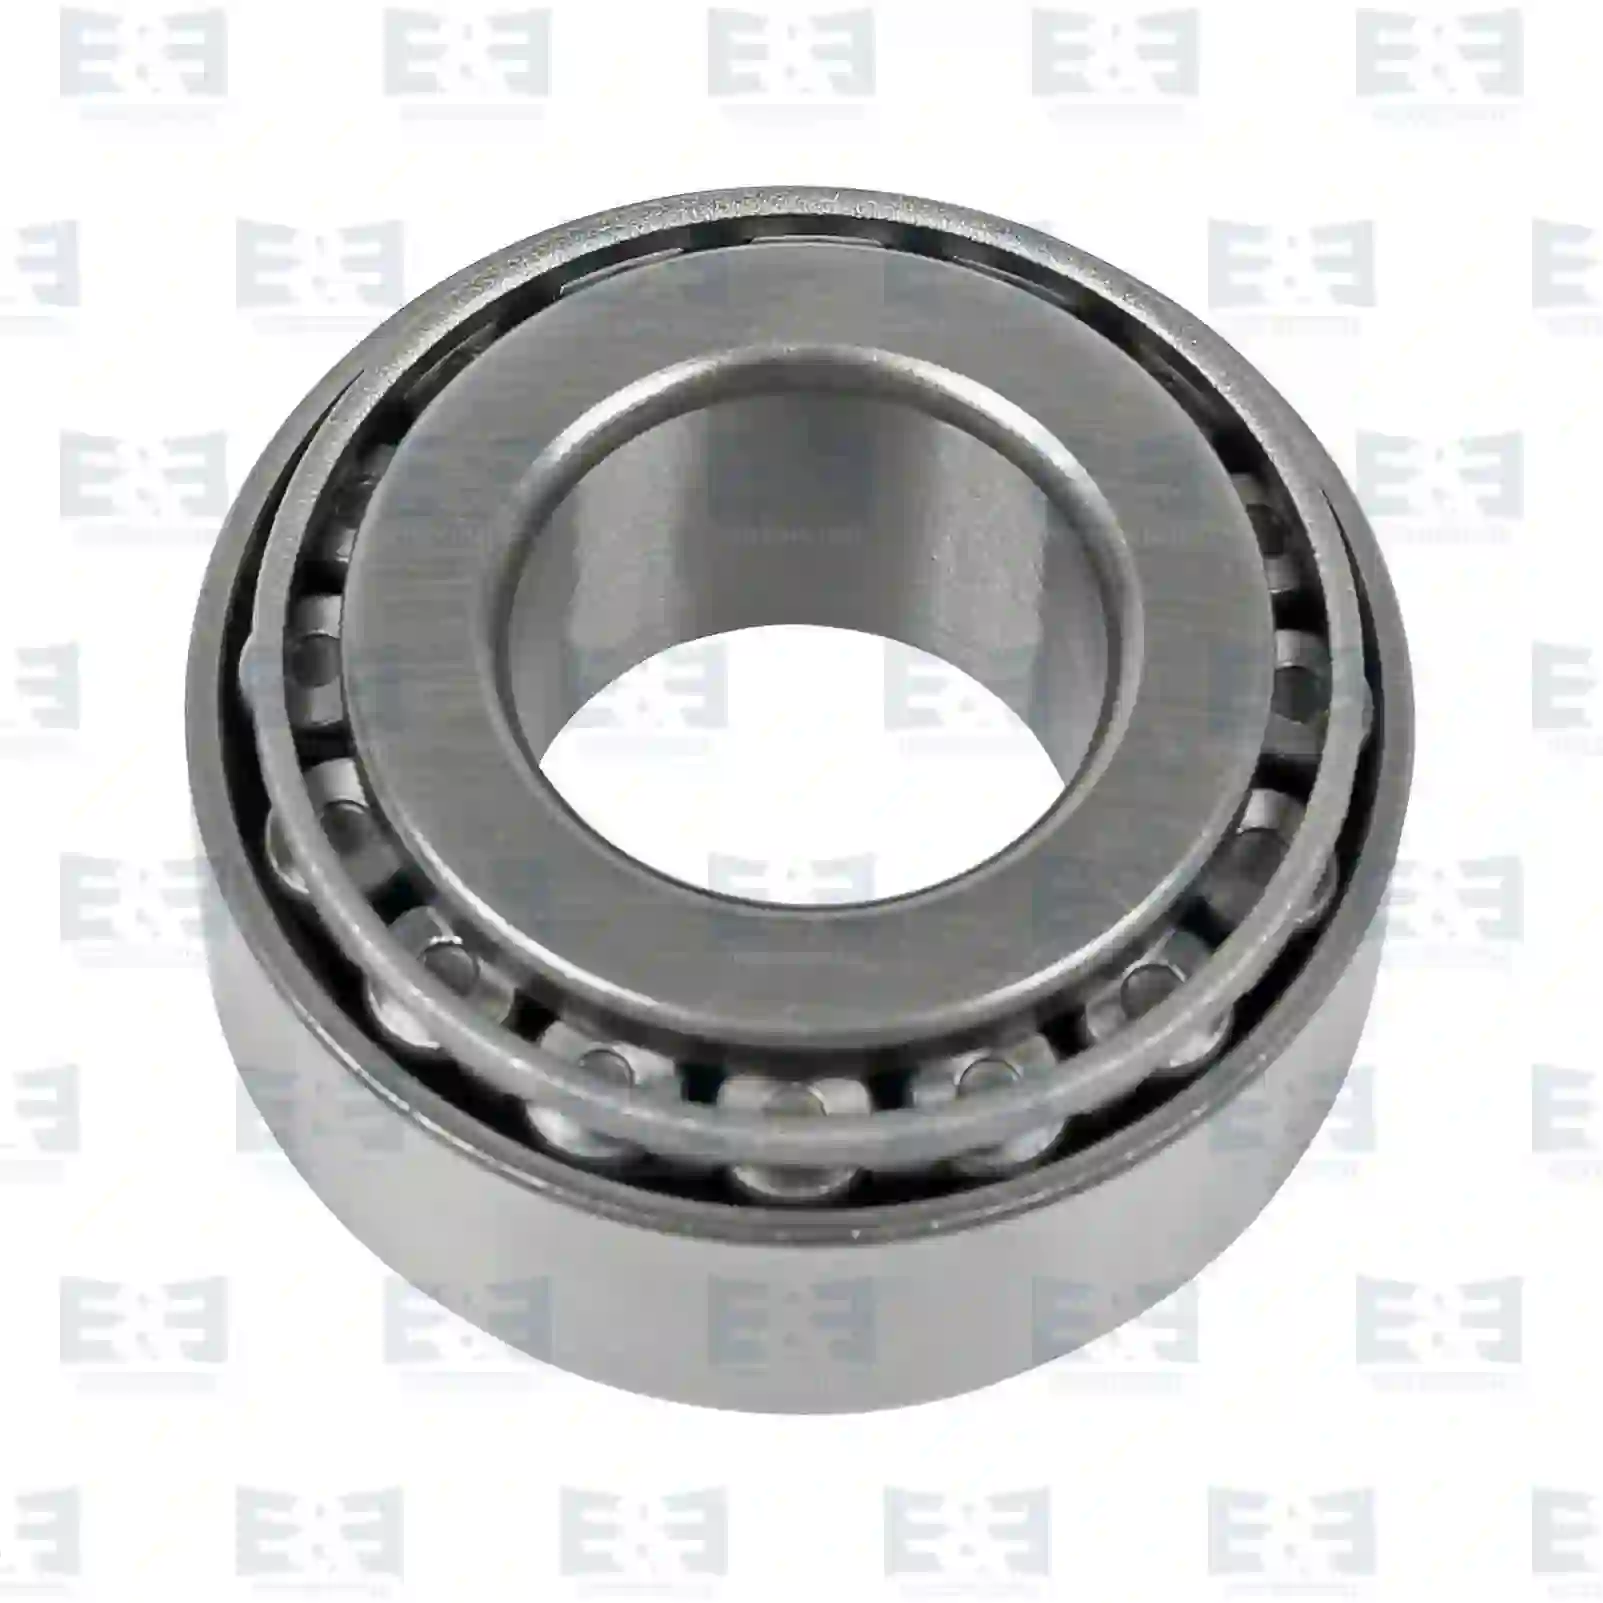 Hub Tapered roller bearing, EE No 2E2284054 ,  oem no:5103869AA, FRC7810, 06324990069, 81320500508, 0039811005, 0039811505, 0039819505, 0059812205, 0069815805, 1409810005, 1409810505, 5001852654, 5003090903, 5010136758, 2D0407625, ZG03018-0008 E&E Truck Spare Parts | Truck Spare Parts, Auotomotive Spare Parts